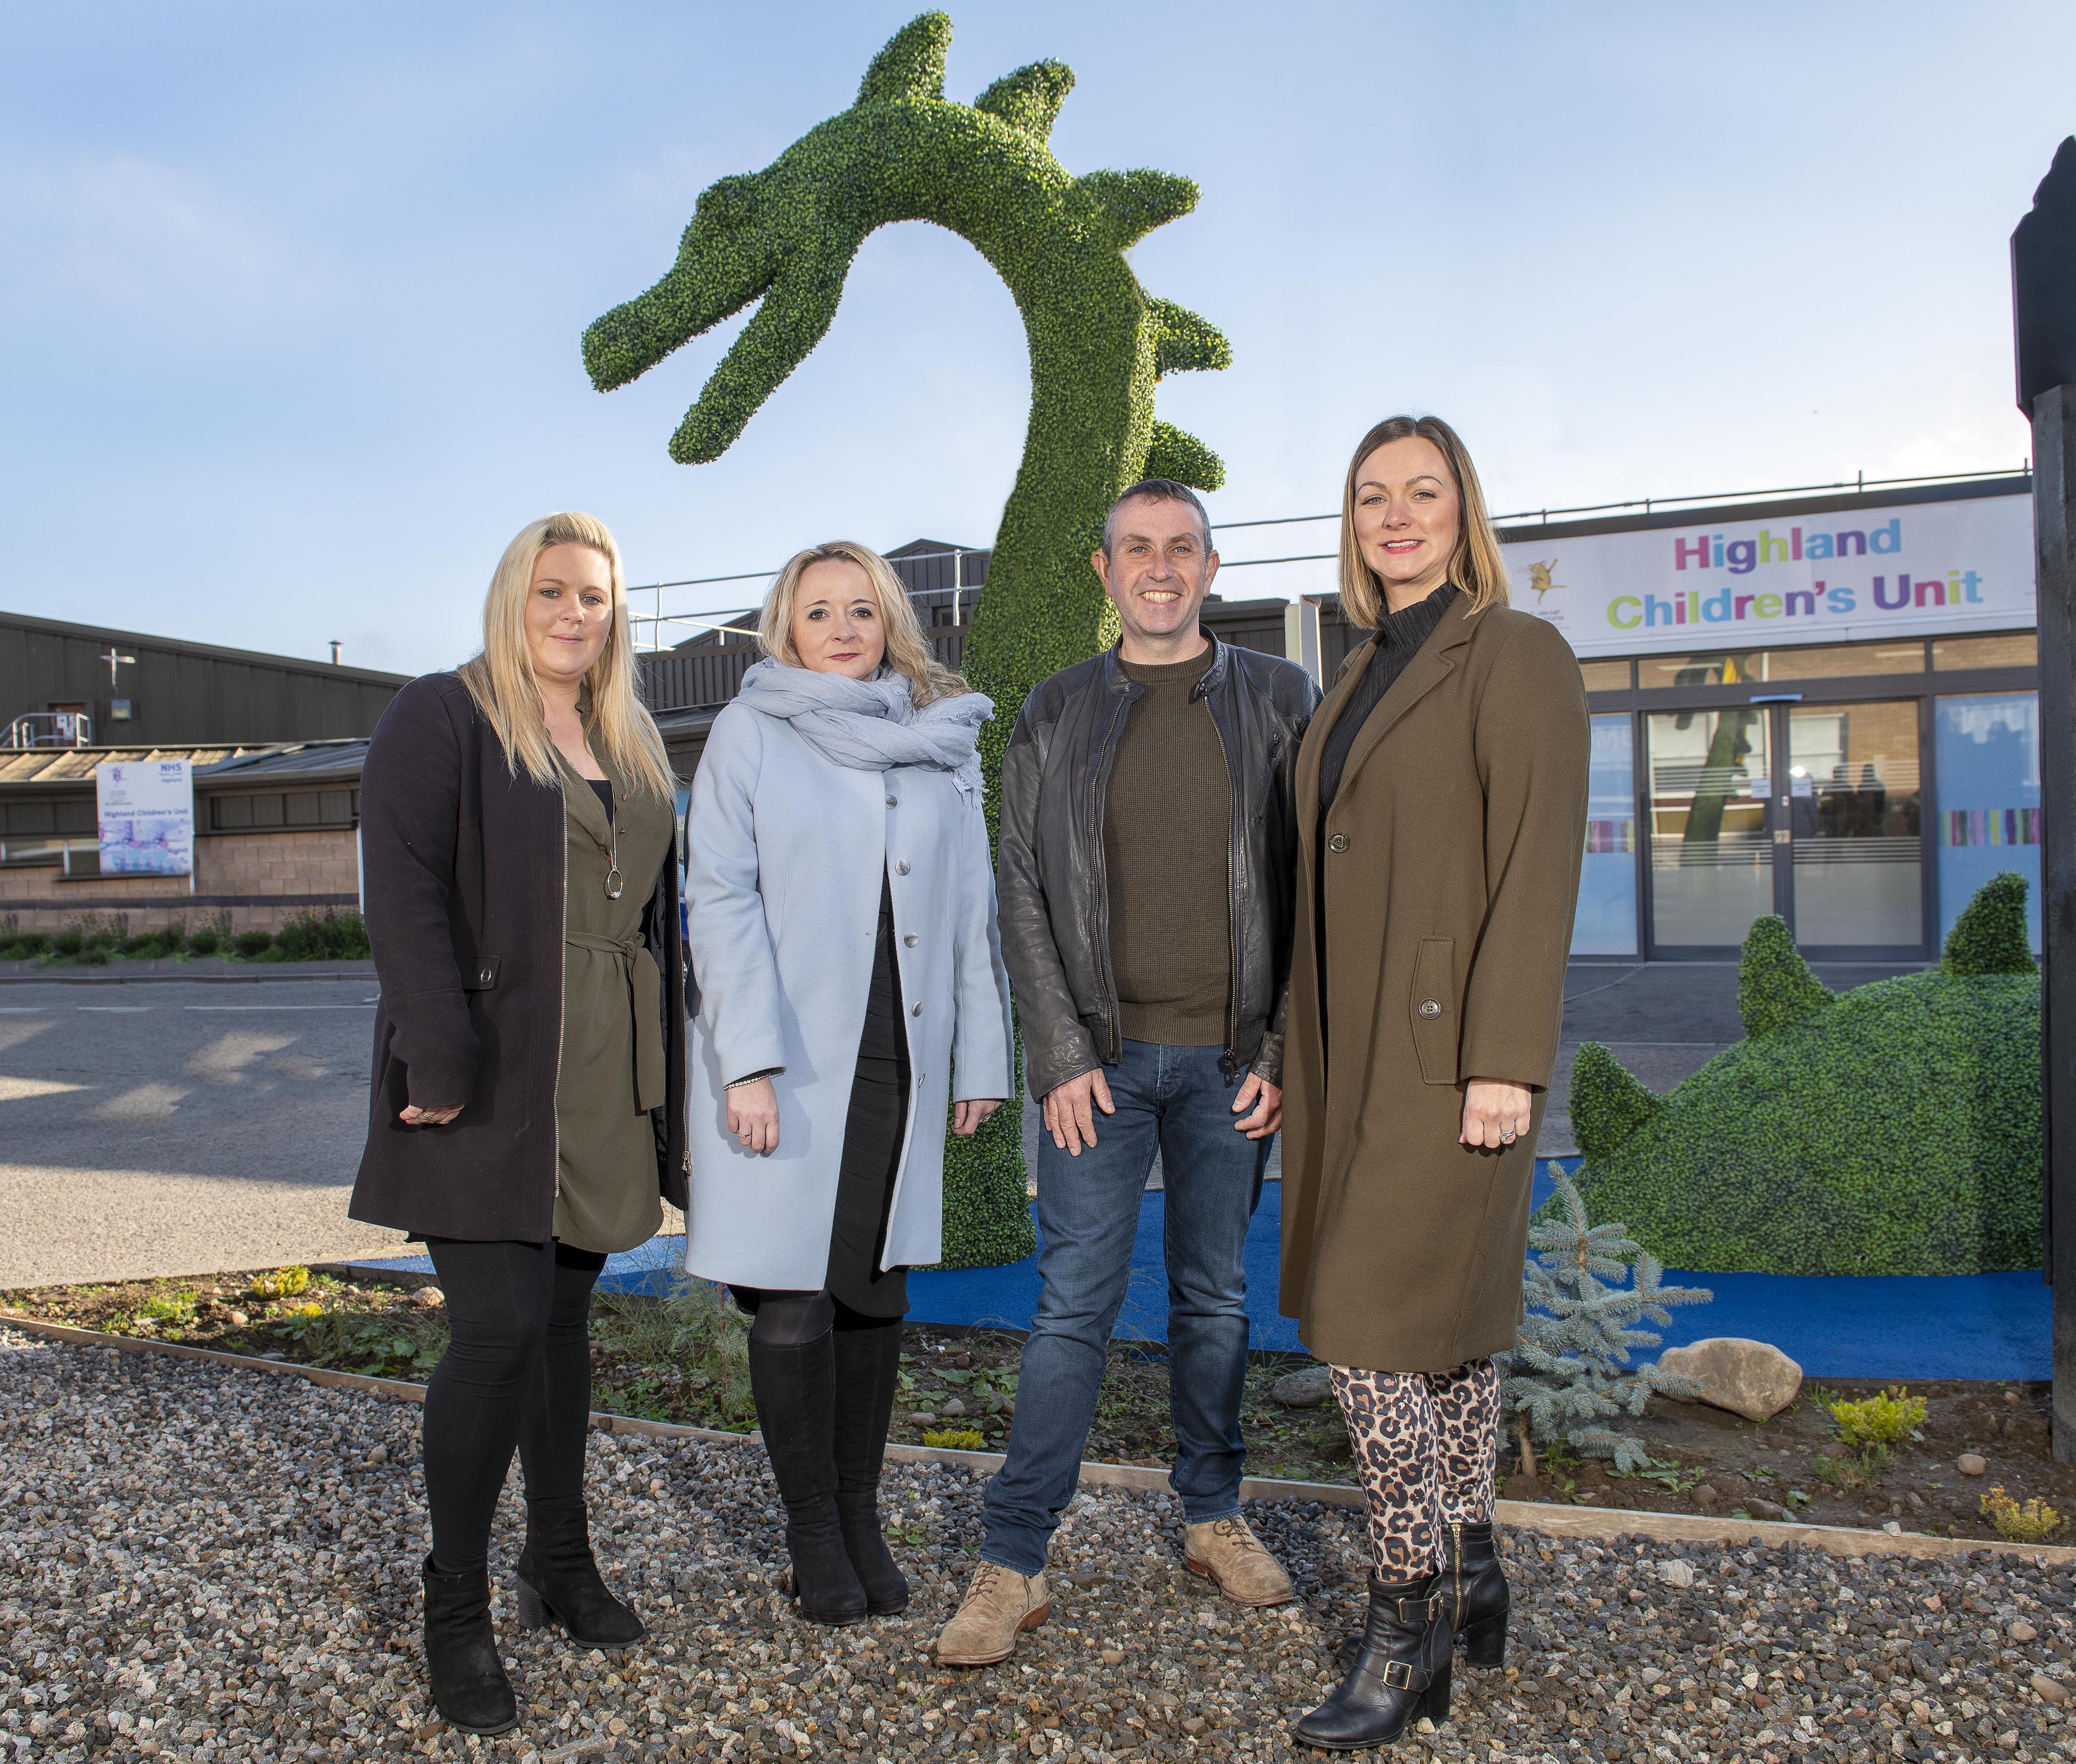 Jacqueline Brown of Munro & Noble, Chairwoman of the Highland Fundraising Board Mary Nimmo, Ronald and Debi Mackenzie of Cruise Loch Ness outside the Highland Children’s Unit.